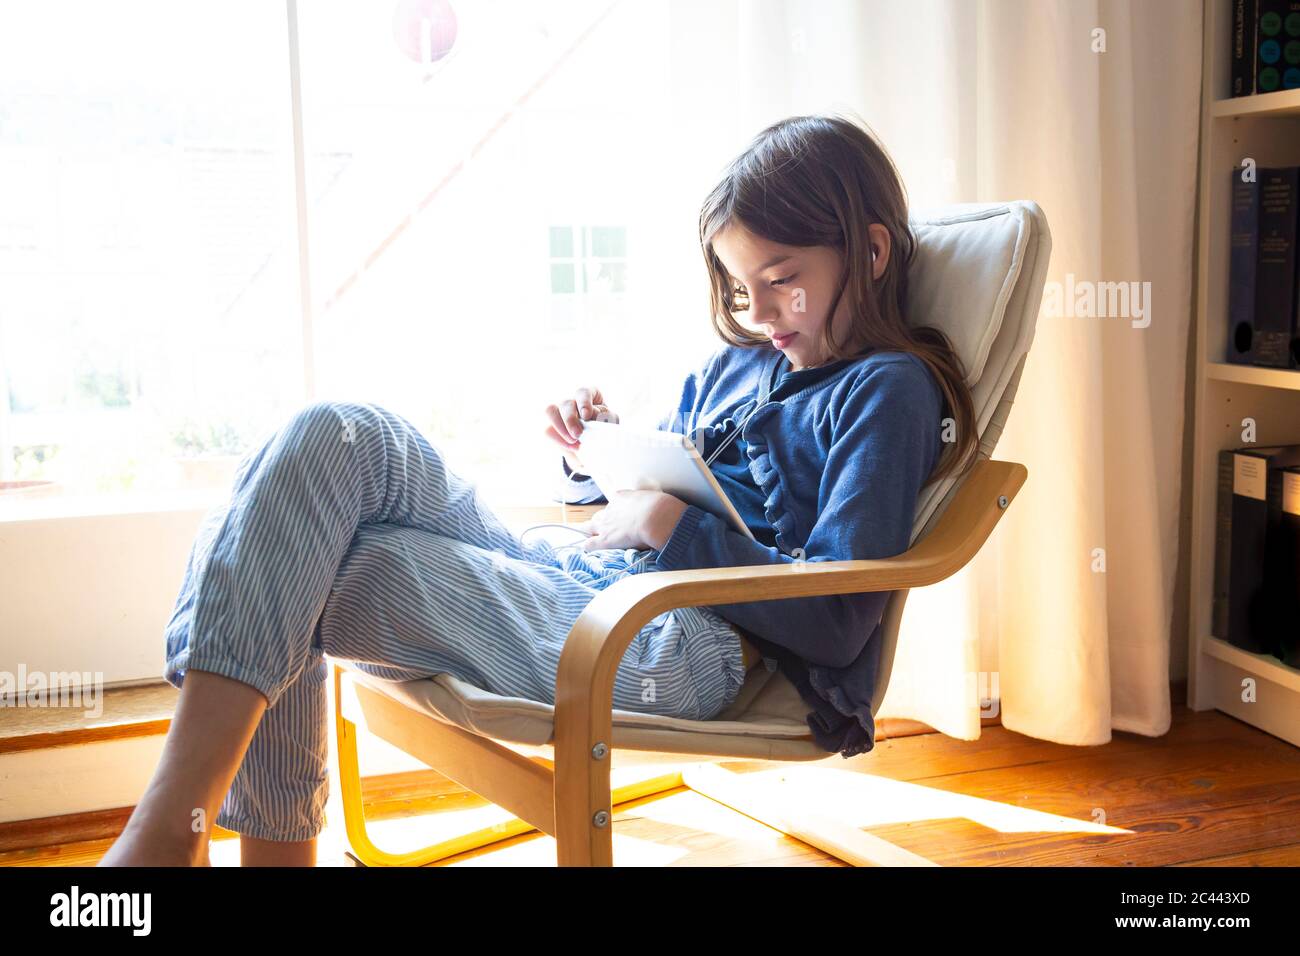 Young girl watching video online on digital tablet while sitting by window at home Stock Photo